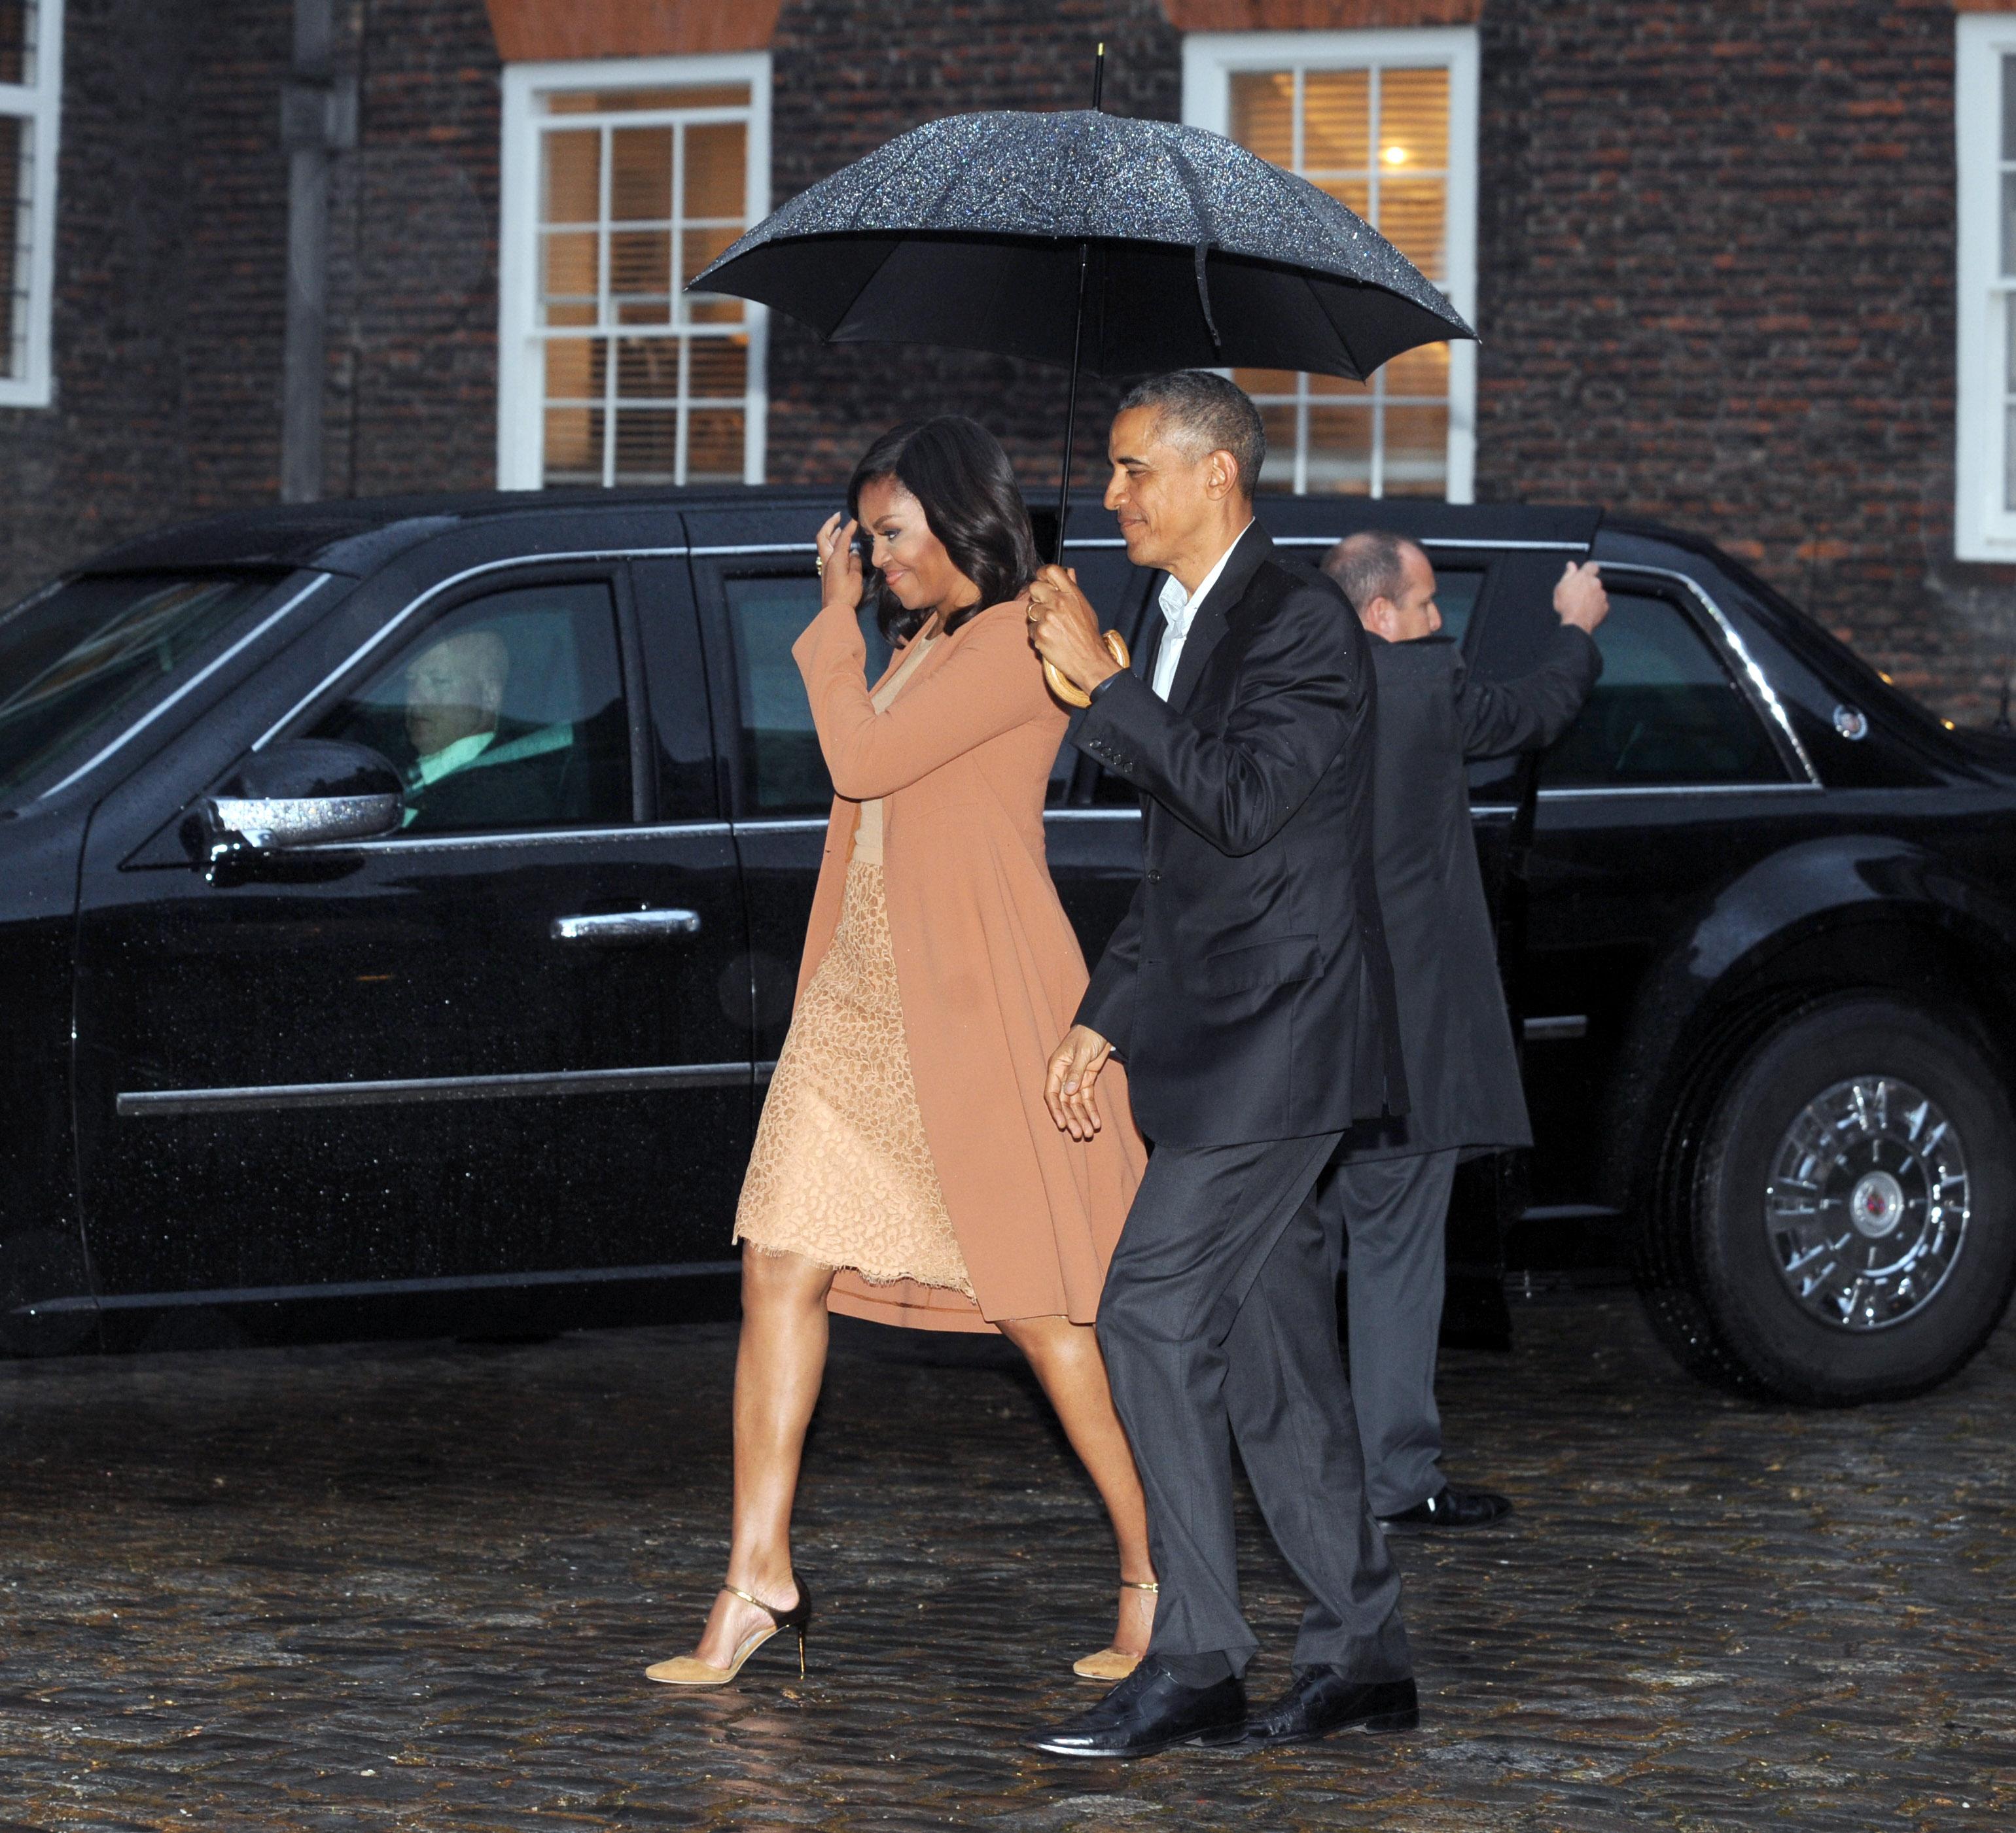 Photo Must Be Credited ©Kate Green/Alpha Press 079965 22/04/2016 President Barack Obama and First Lady Michelle Obama of the United States of America arrive for a dinner at Kensington Palace in London. Reporters / Alpha